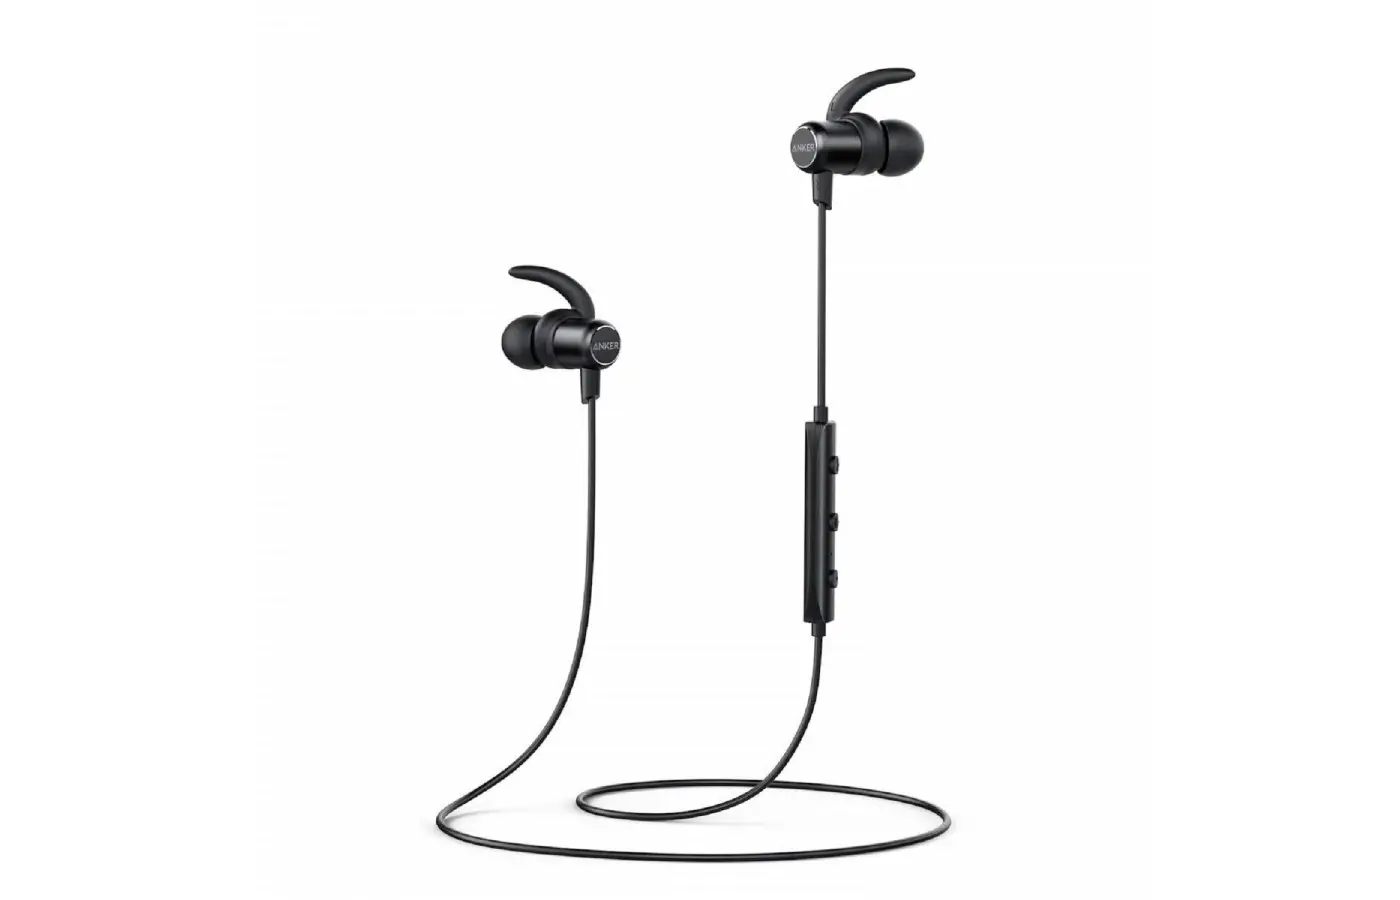 The Anker SoundBuds Slim+ offers 7 hours of listening.